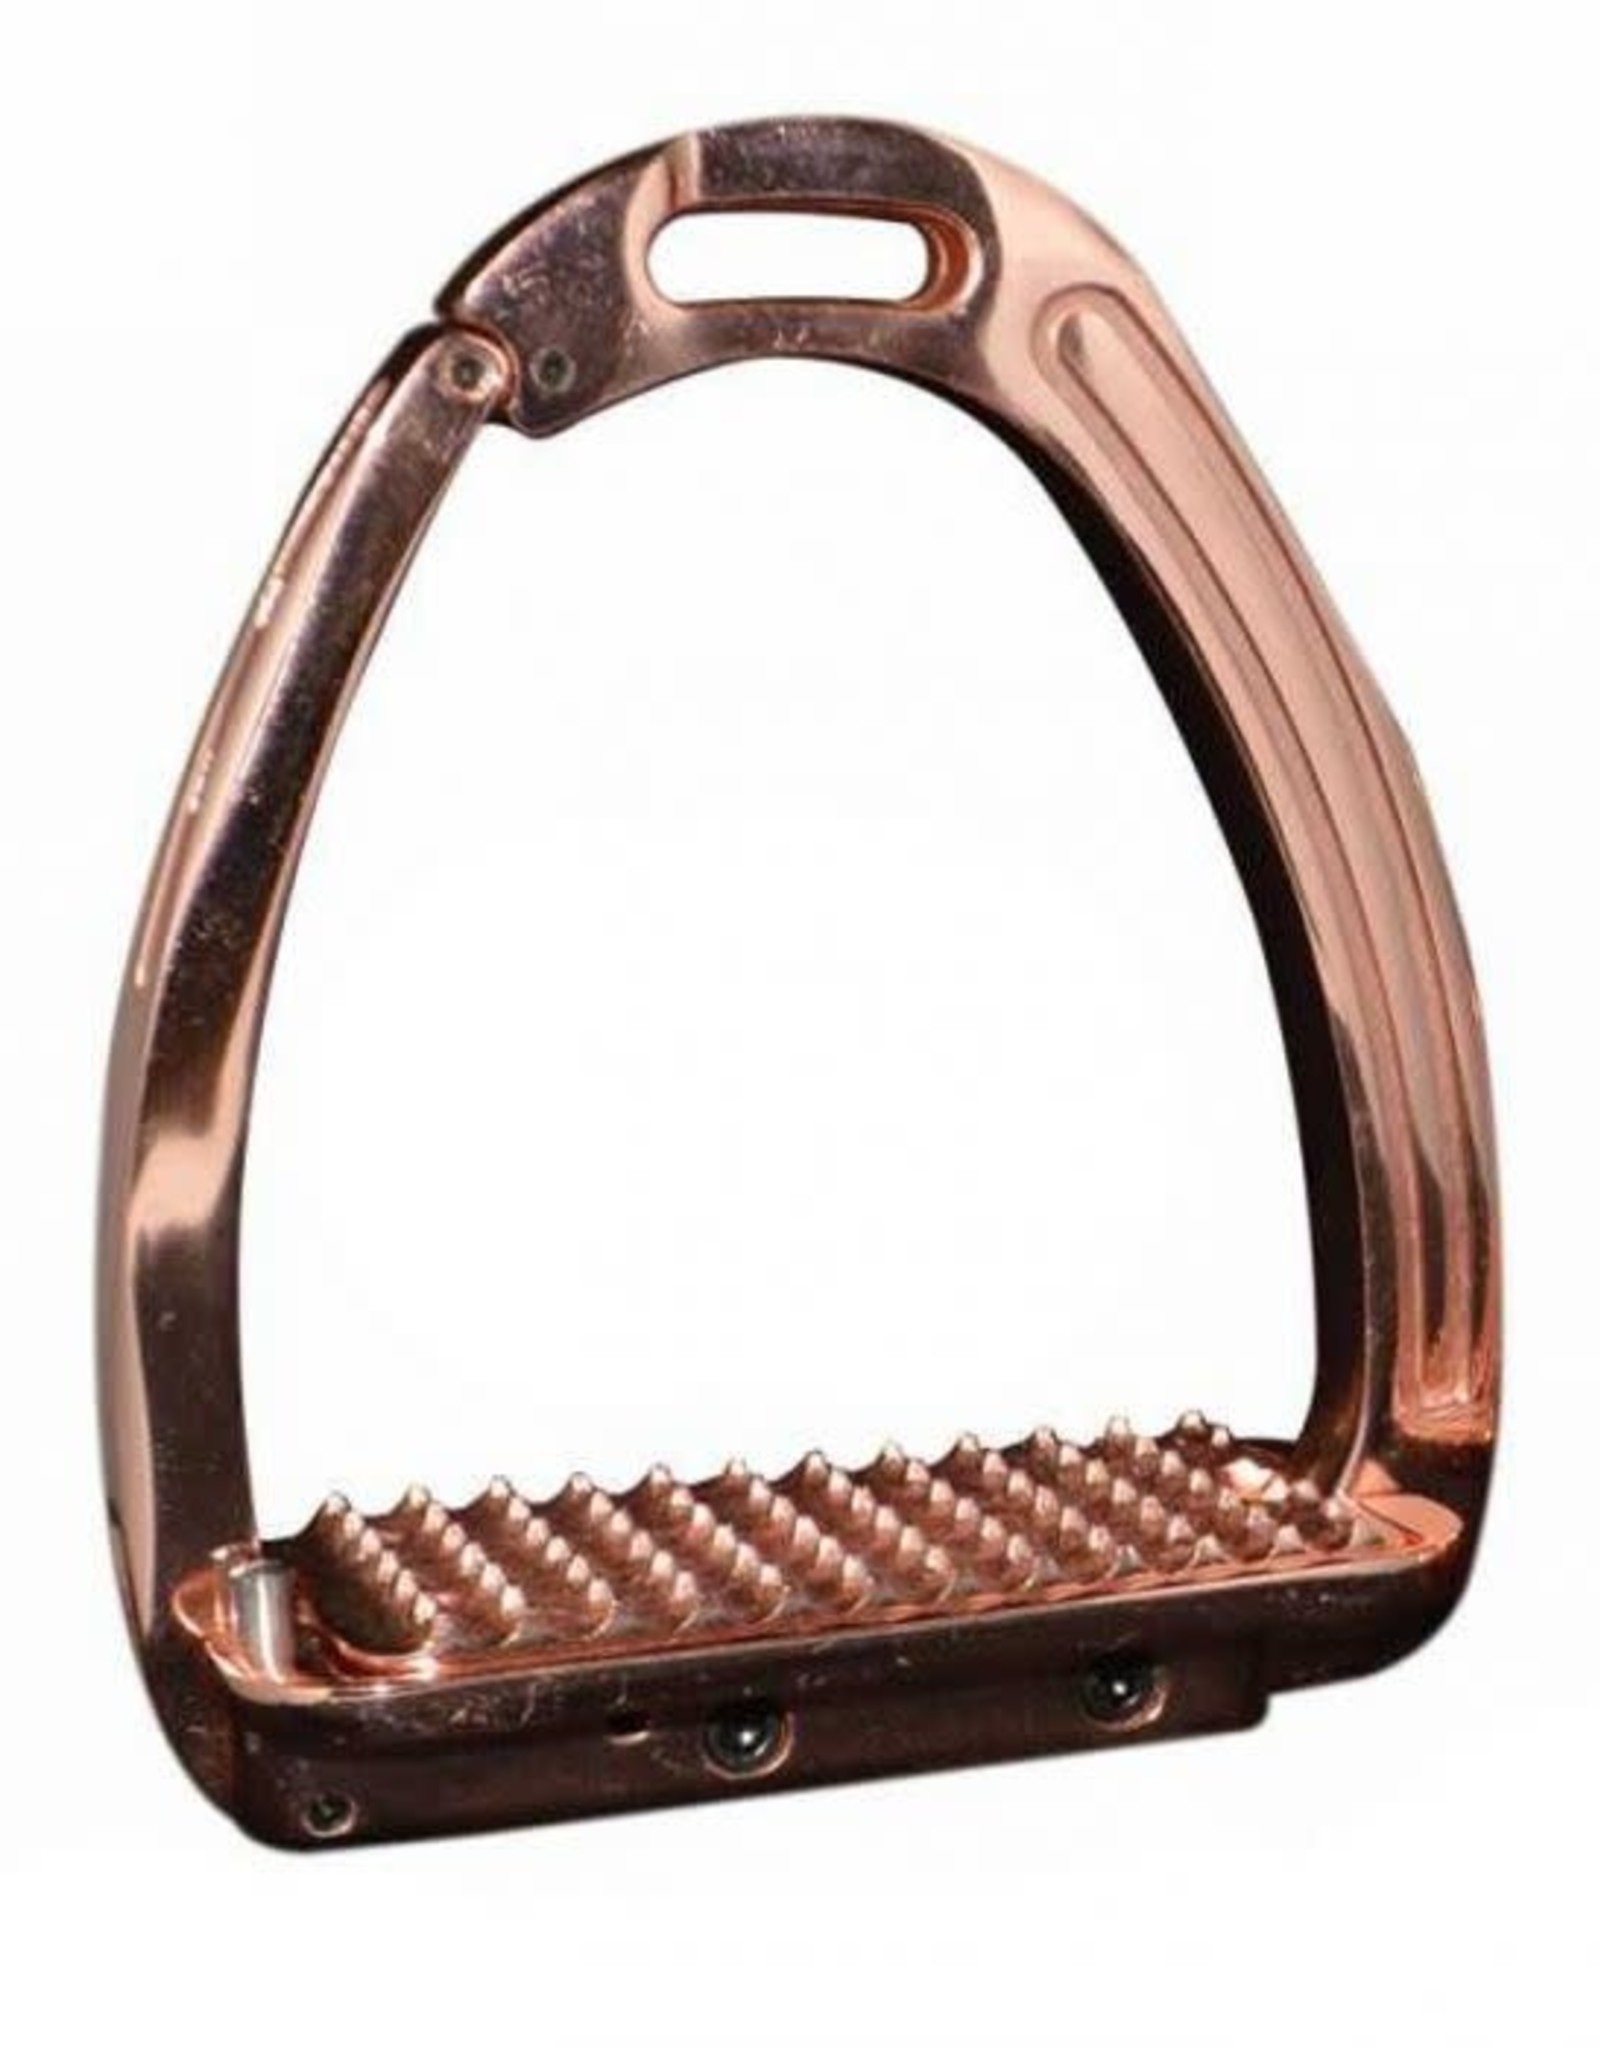 HORSE TECH SAFETY ALUMINUM STIRRUPS WITH MAGNET